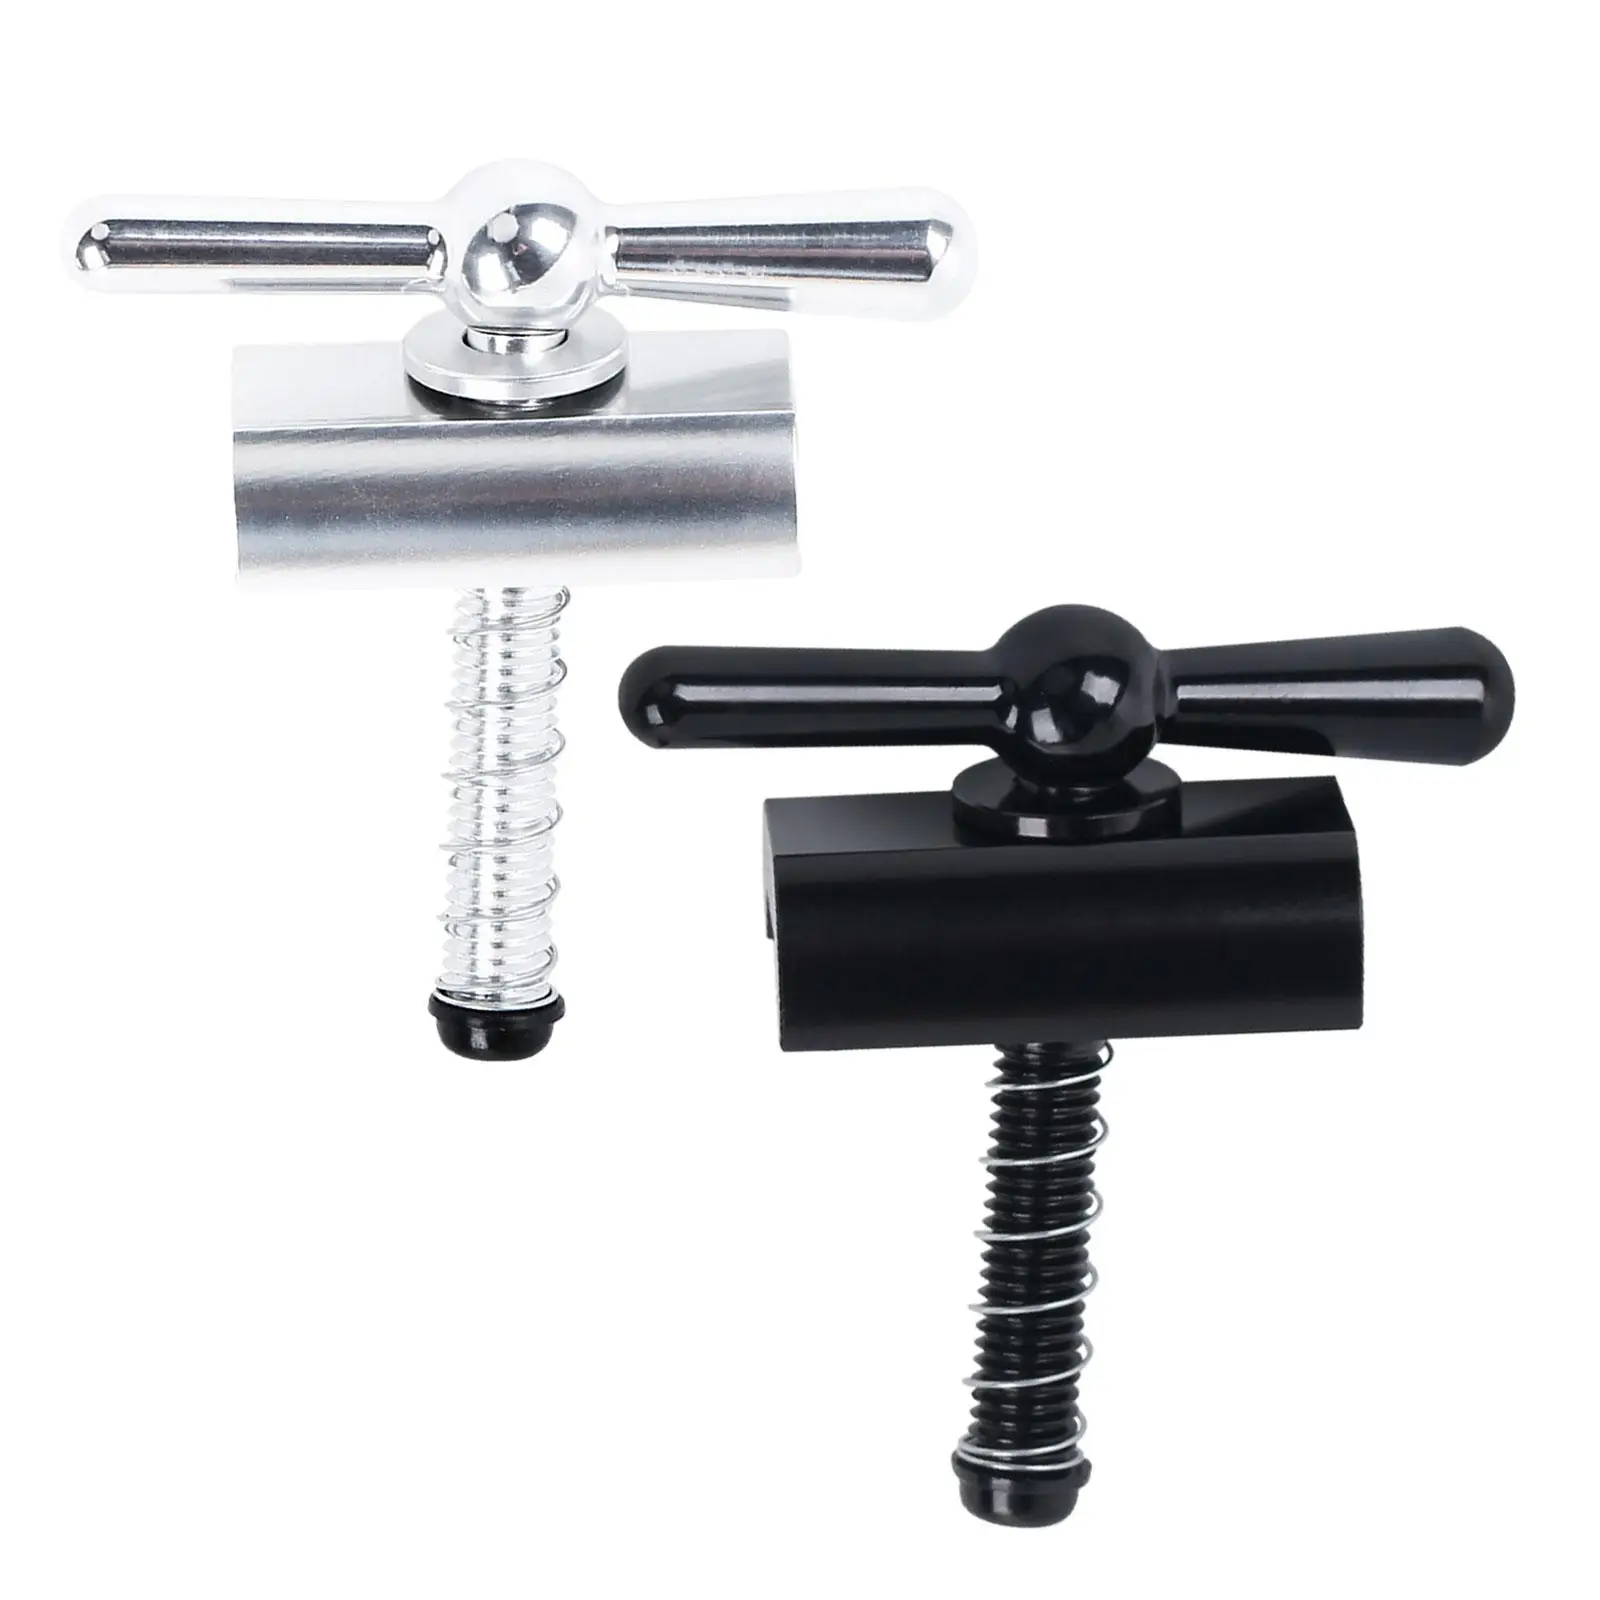 Folding Bike Hinge Clamp High Strength Bicycle Hinge Clamp Lever for Frame